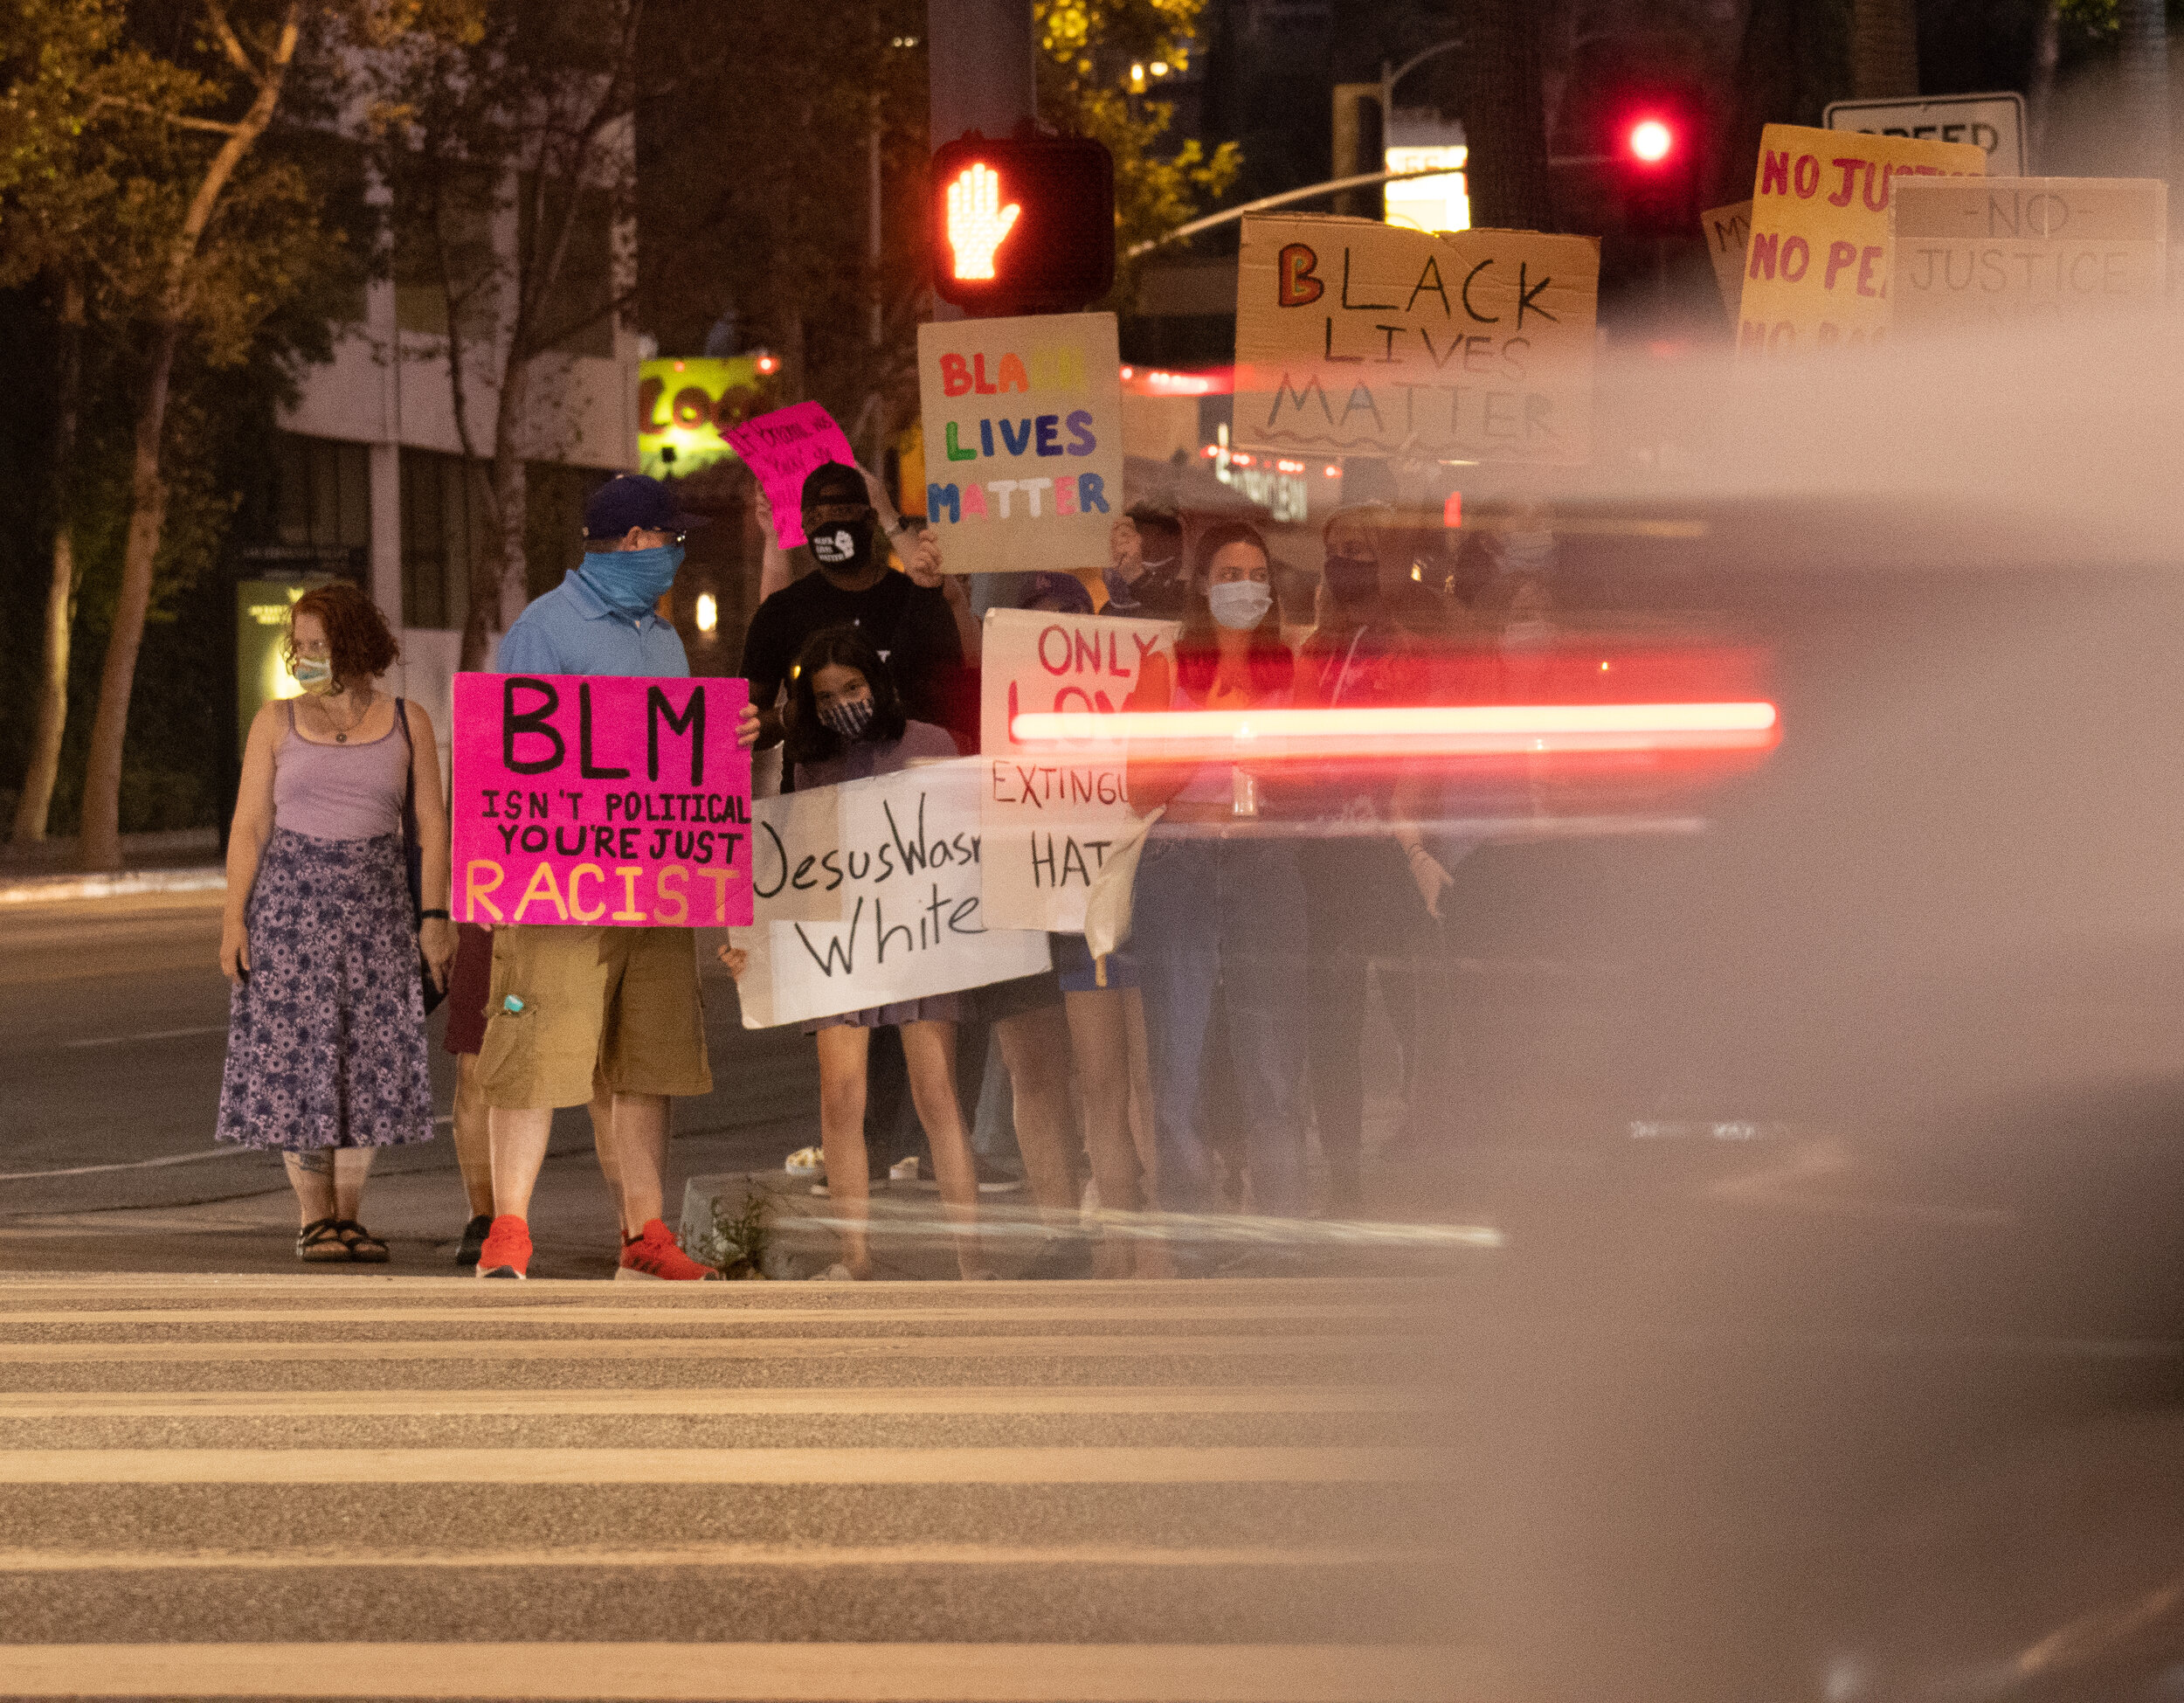   Protesters with The Valley of Change stand outside the Sherman Oaks Galleria at the southwest corner of Sepulveda Blvd and Ventura Blvd in Sherman Oaks, Calif. The Saturday, Sept. 26, 2020, Candlelight Vigil for Breonna Taylor brought together doze